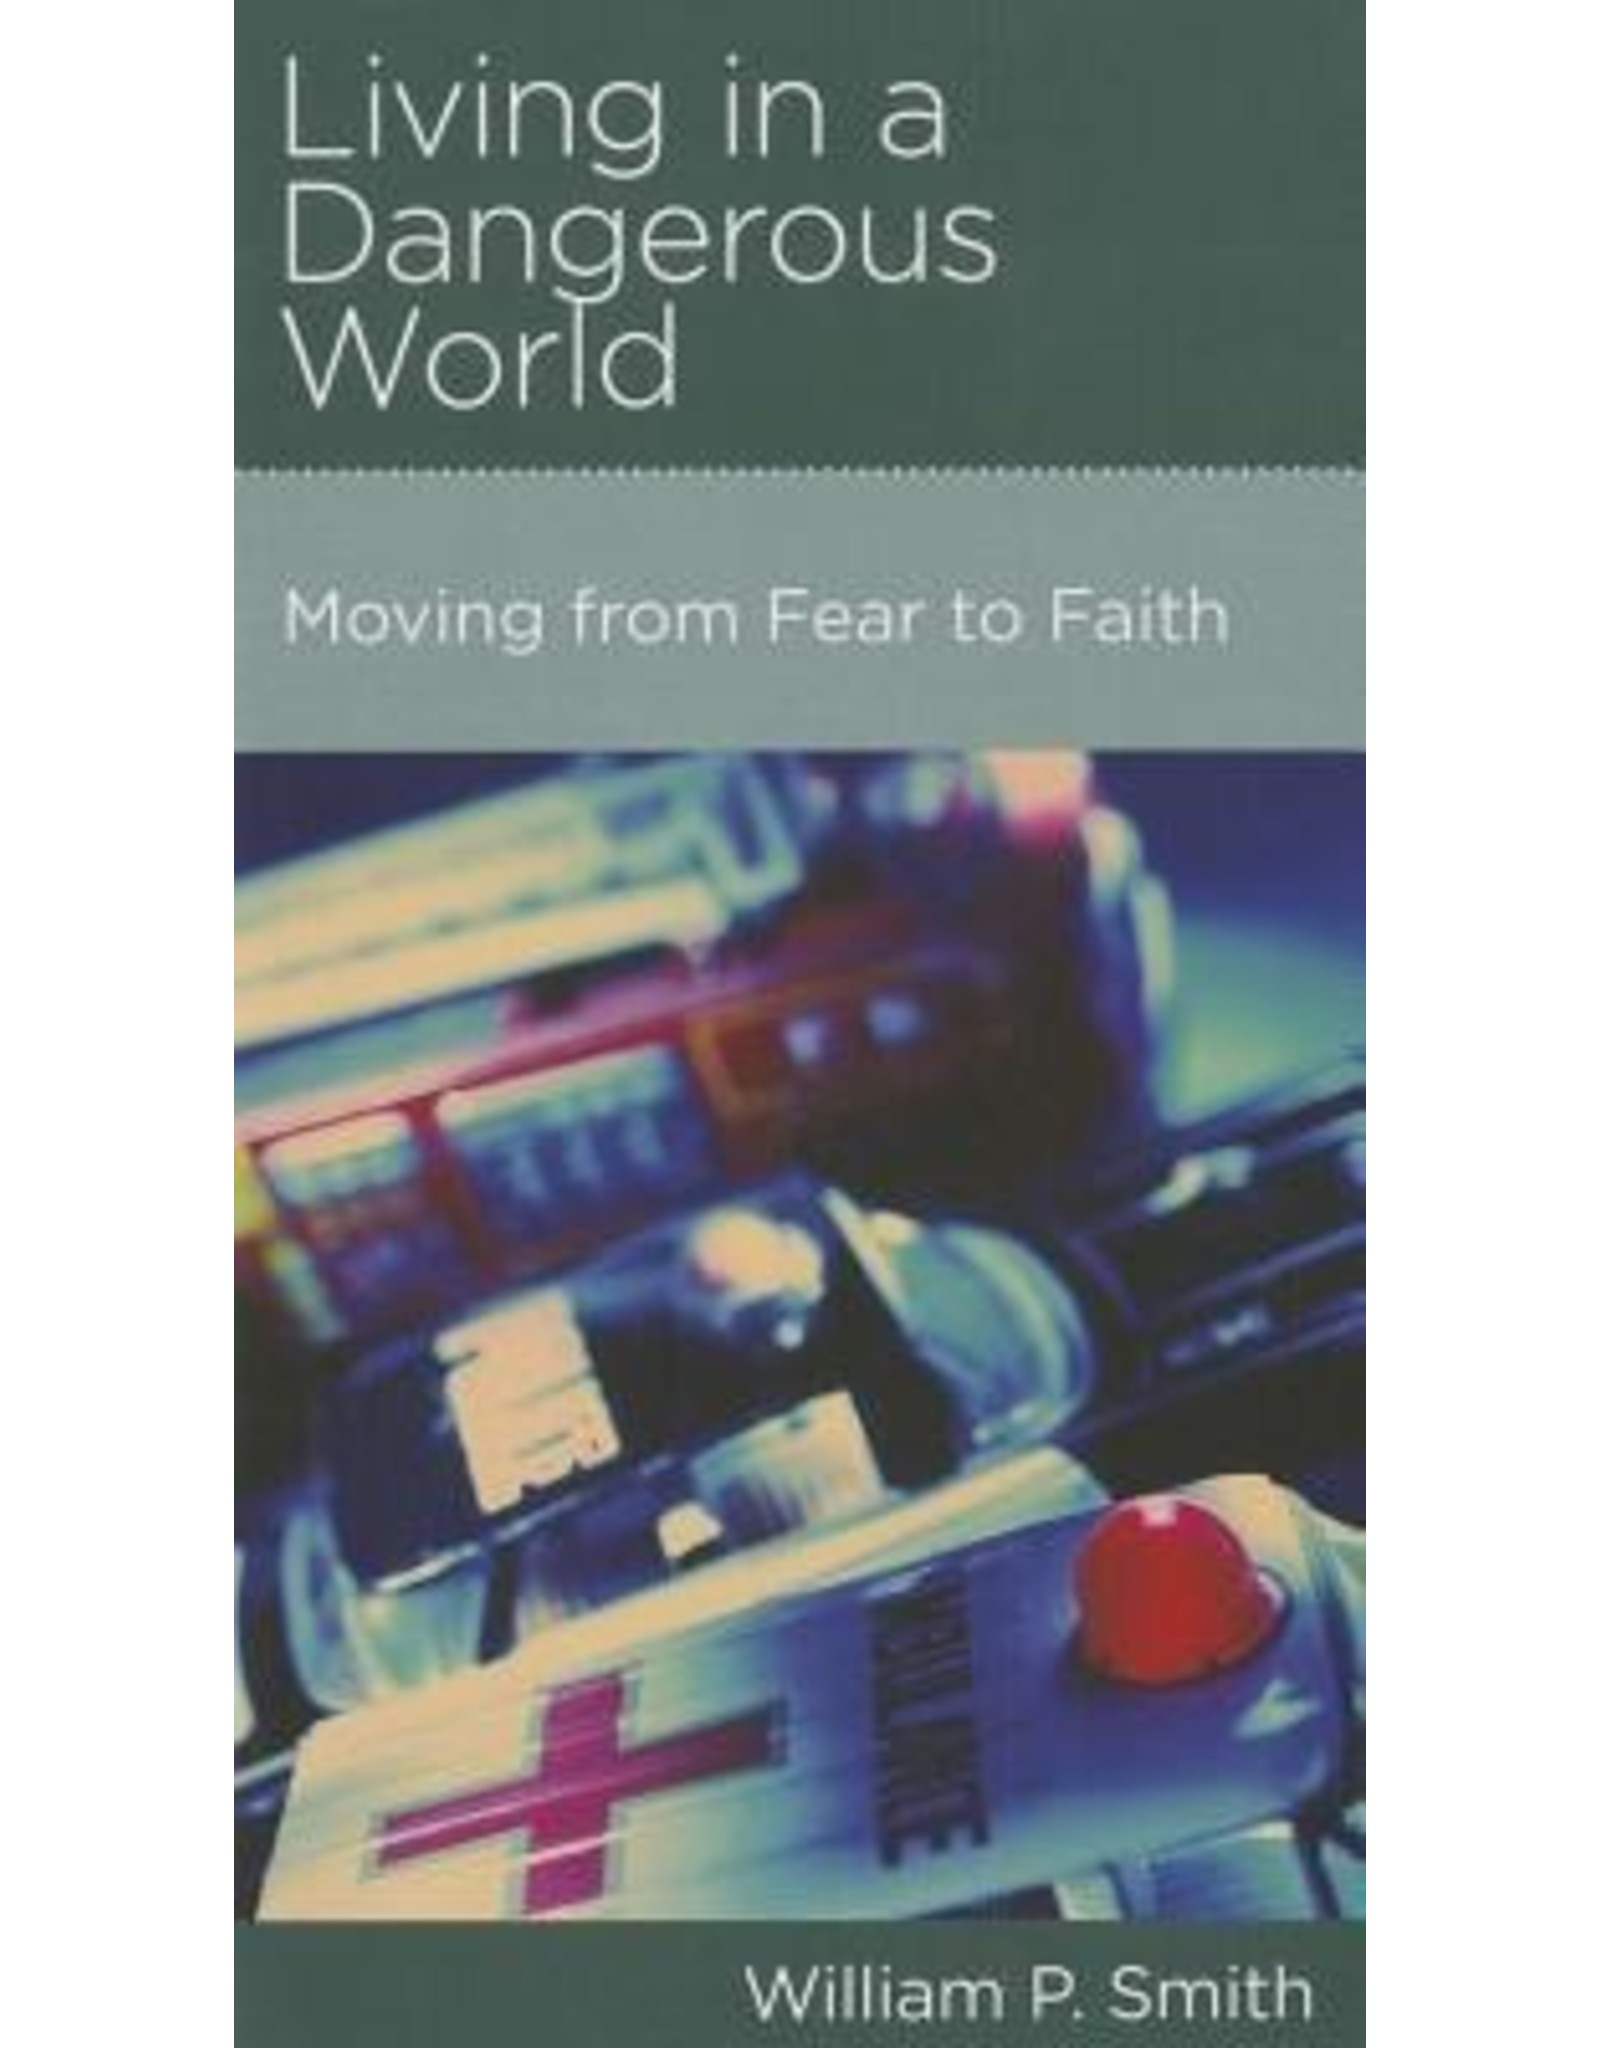 William P Smith Living In A Dangerous World: Moving from fear to faith